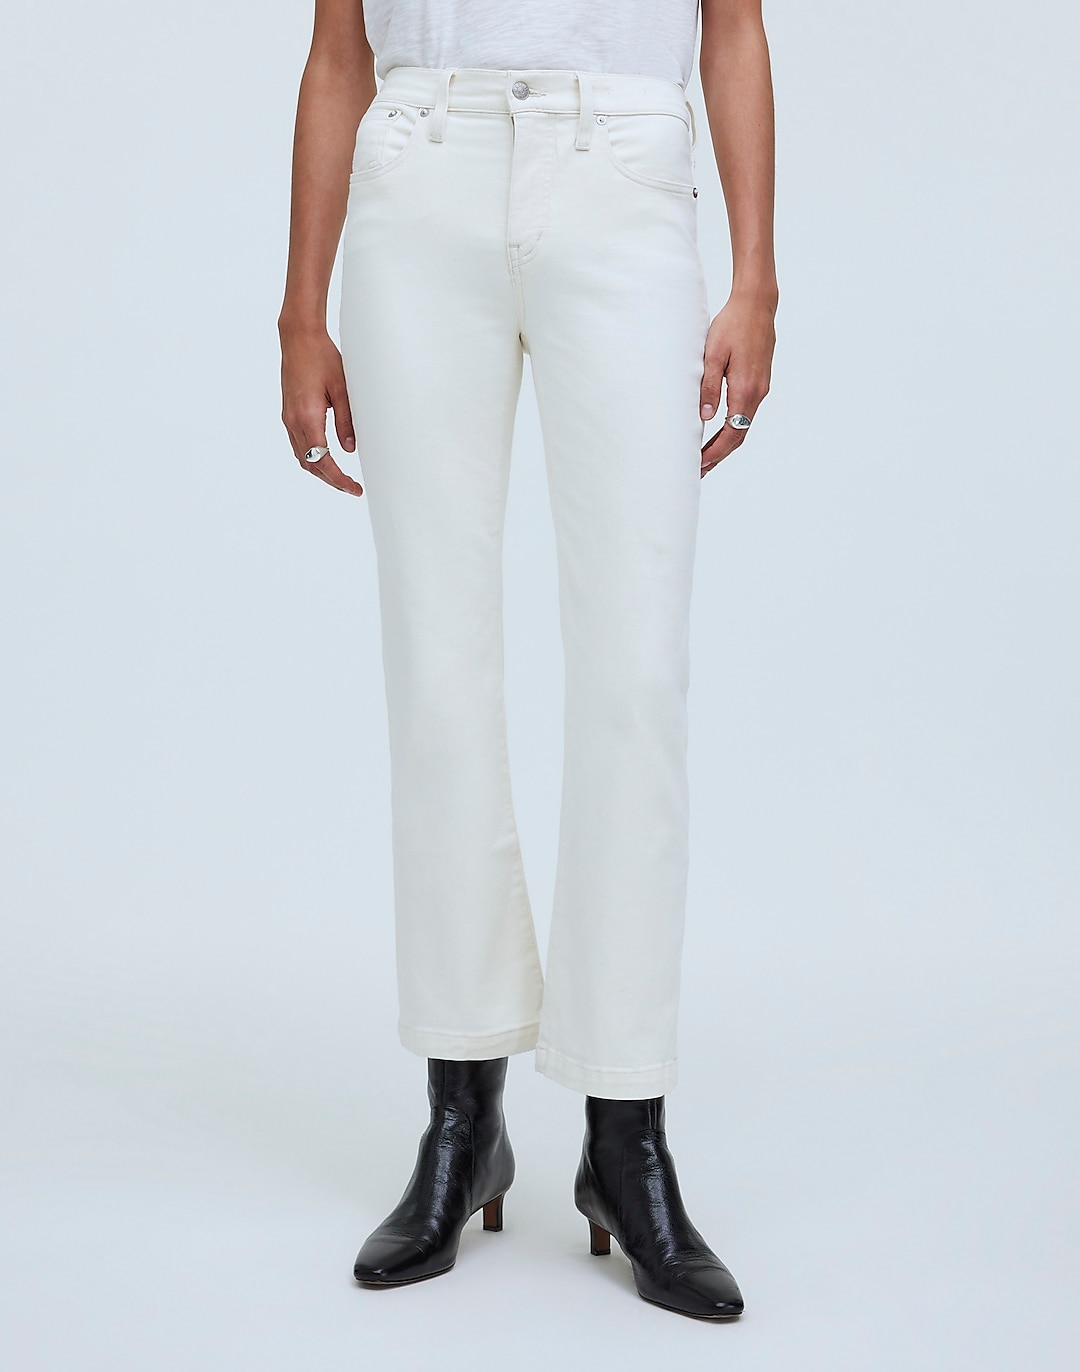 Kick Out Crop Jeans in Vintage Canvas Wash | Madewell